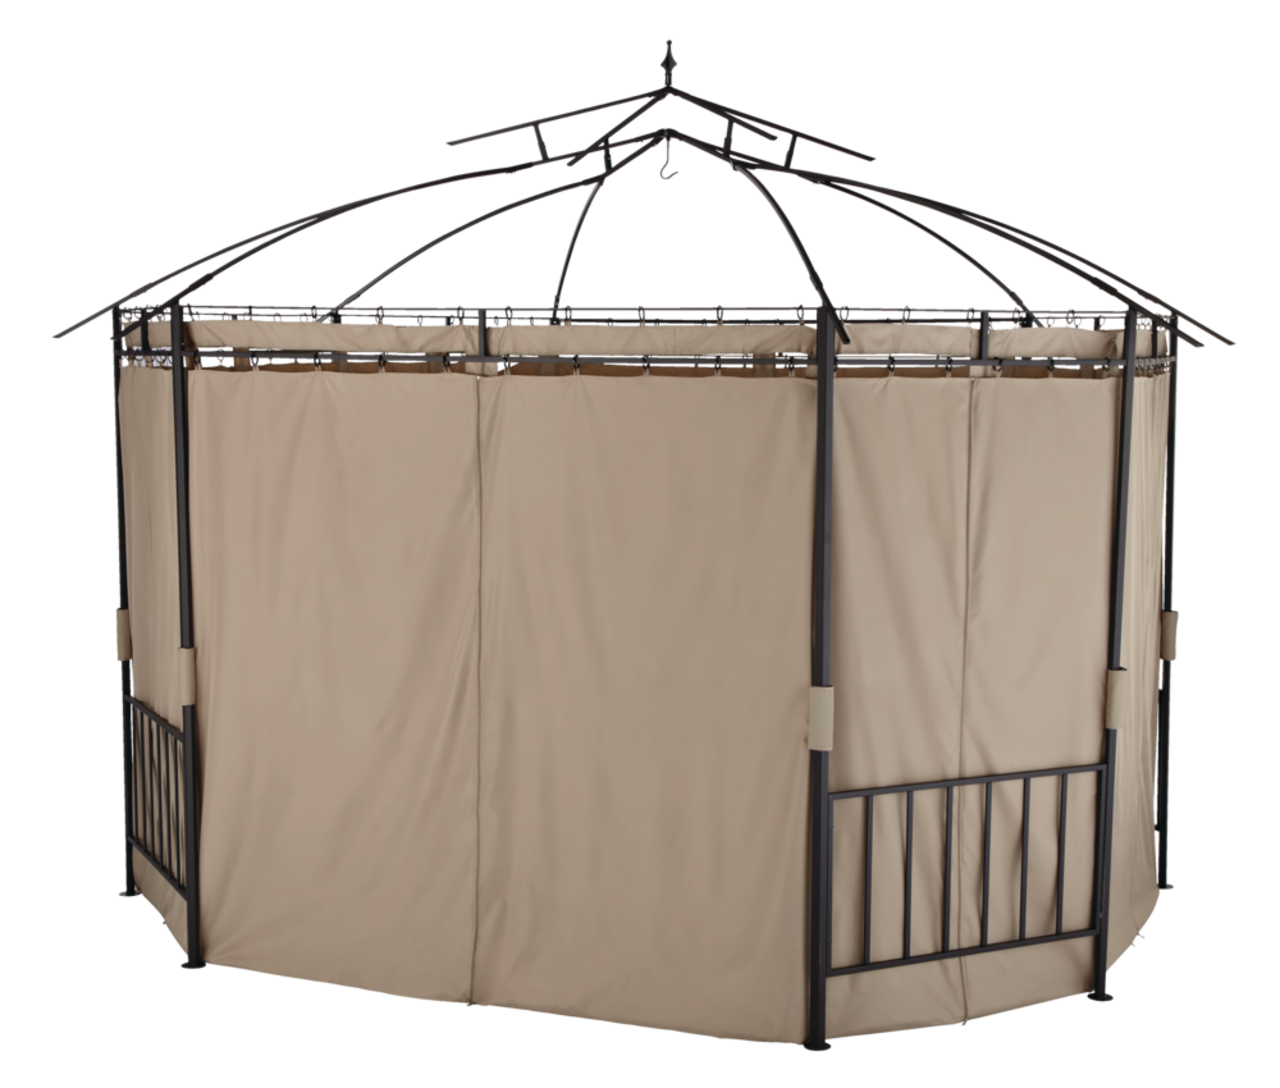 For Living Netting and Walls for Octagon Gazebo